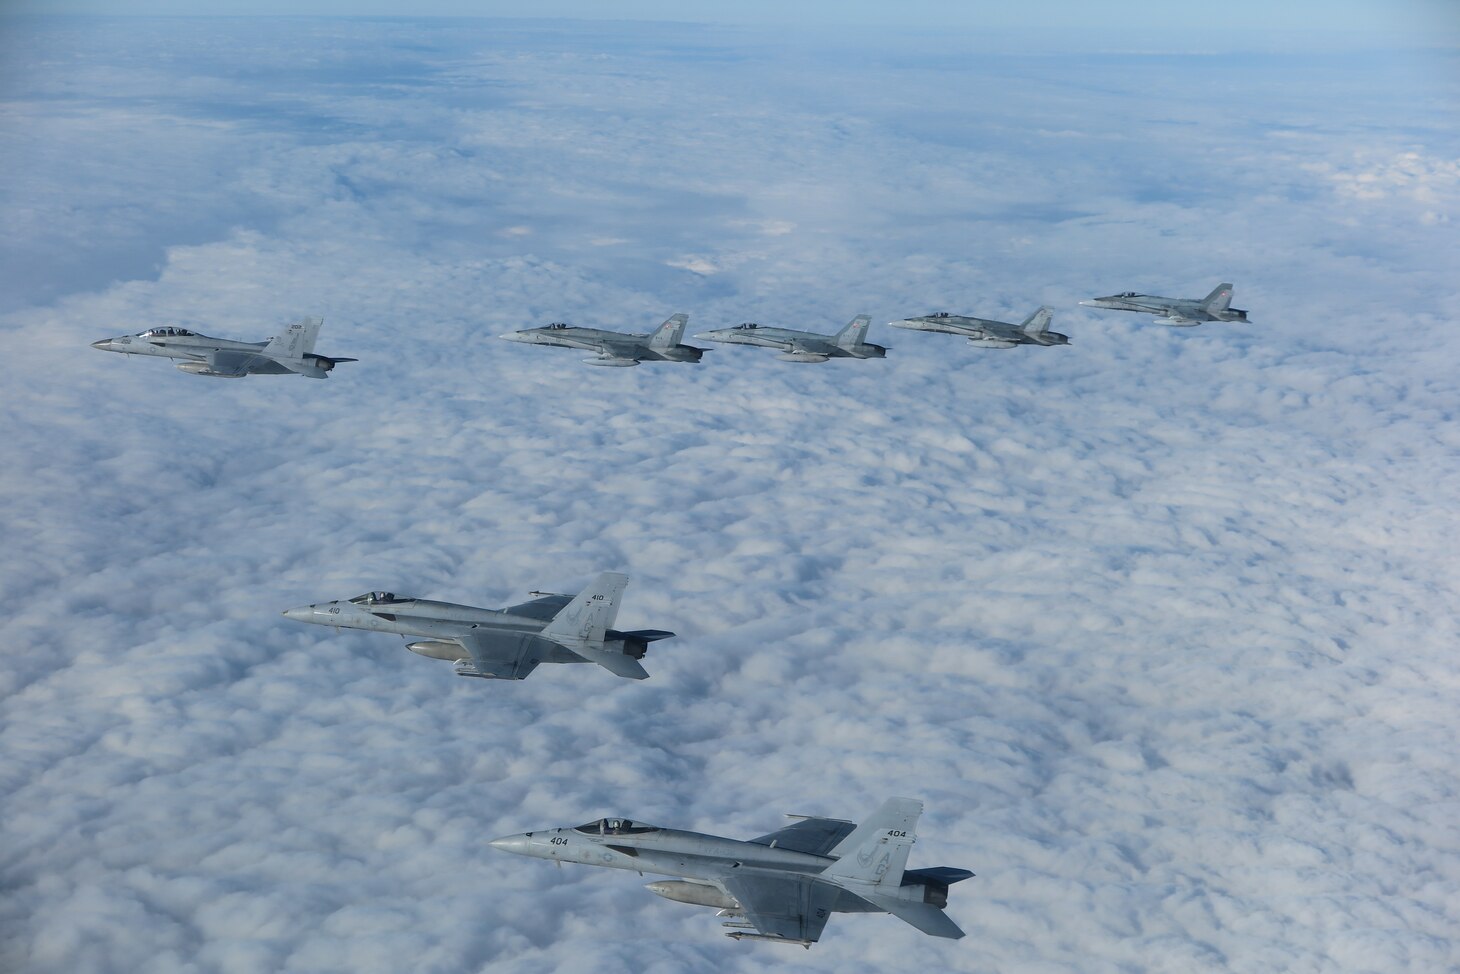 Three F/A-18E Super Hornet aircraft assigned to Carrier Air Wing (CVW) 7 and four CF-18 Hornet aircraft assigned to the Royal Canadian Air Force fly in formation over Romania during the NATO-led vigilance activity Neptune Strike 22.2 (NEST 22.2), Oct. 14, 2022.